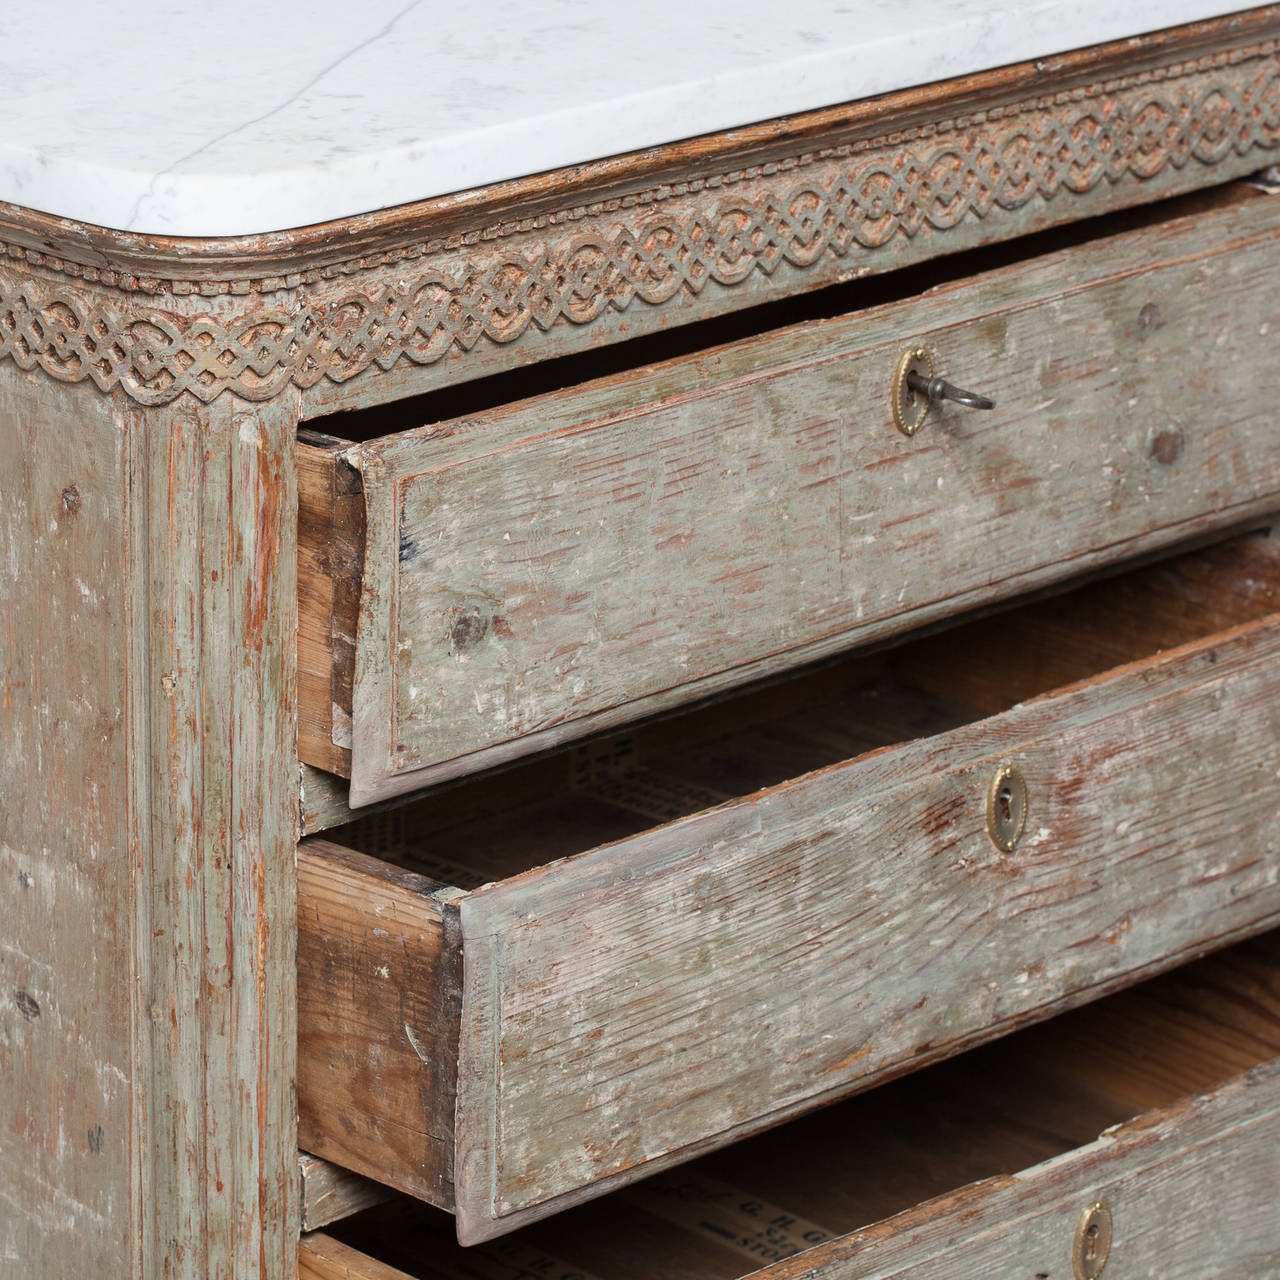 18th Century A Swedish Gustavian Period Small chest of Drawers circa 1780.